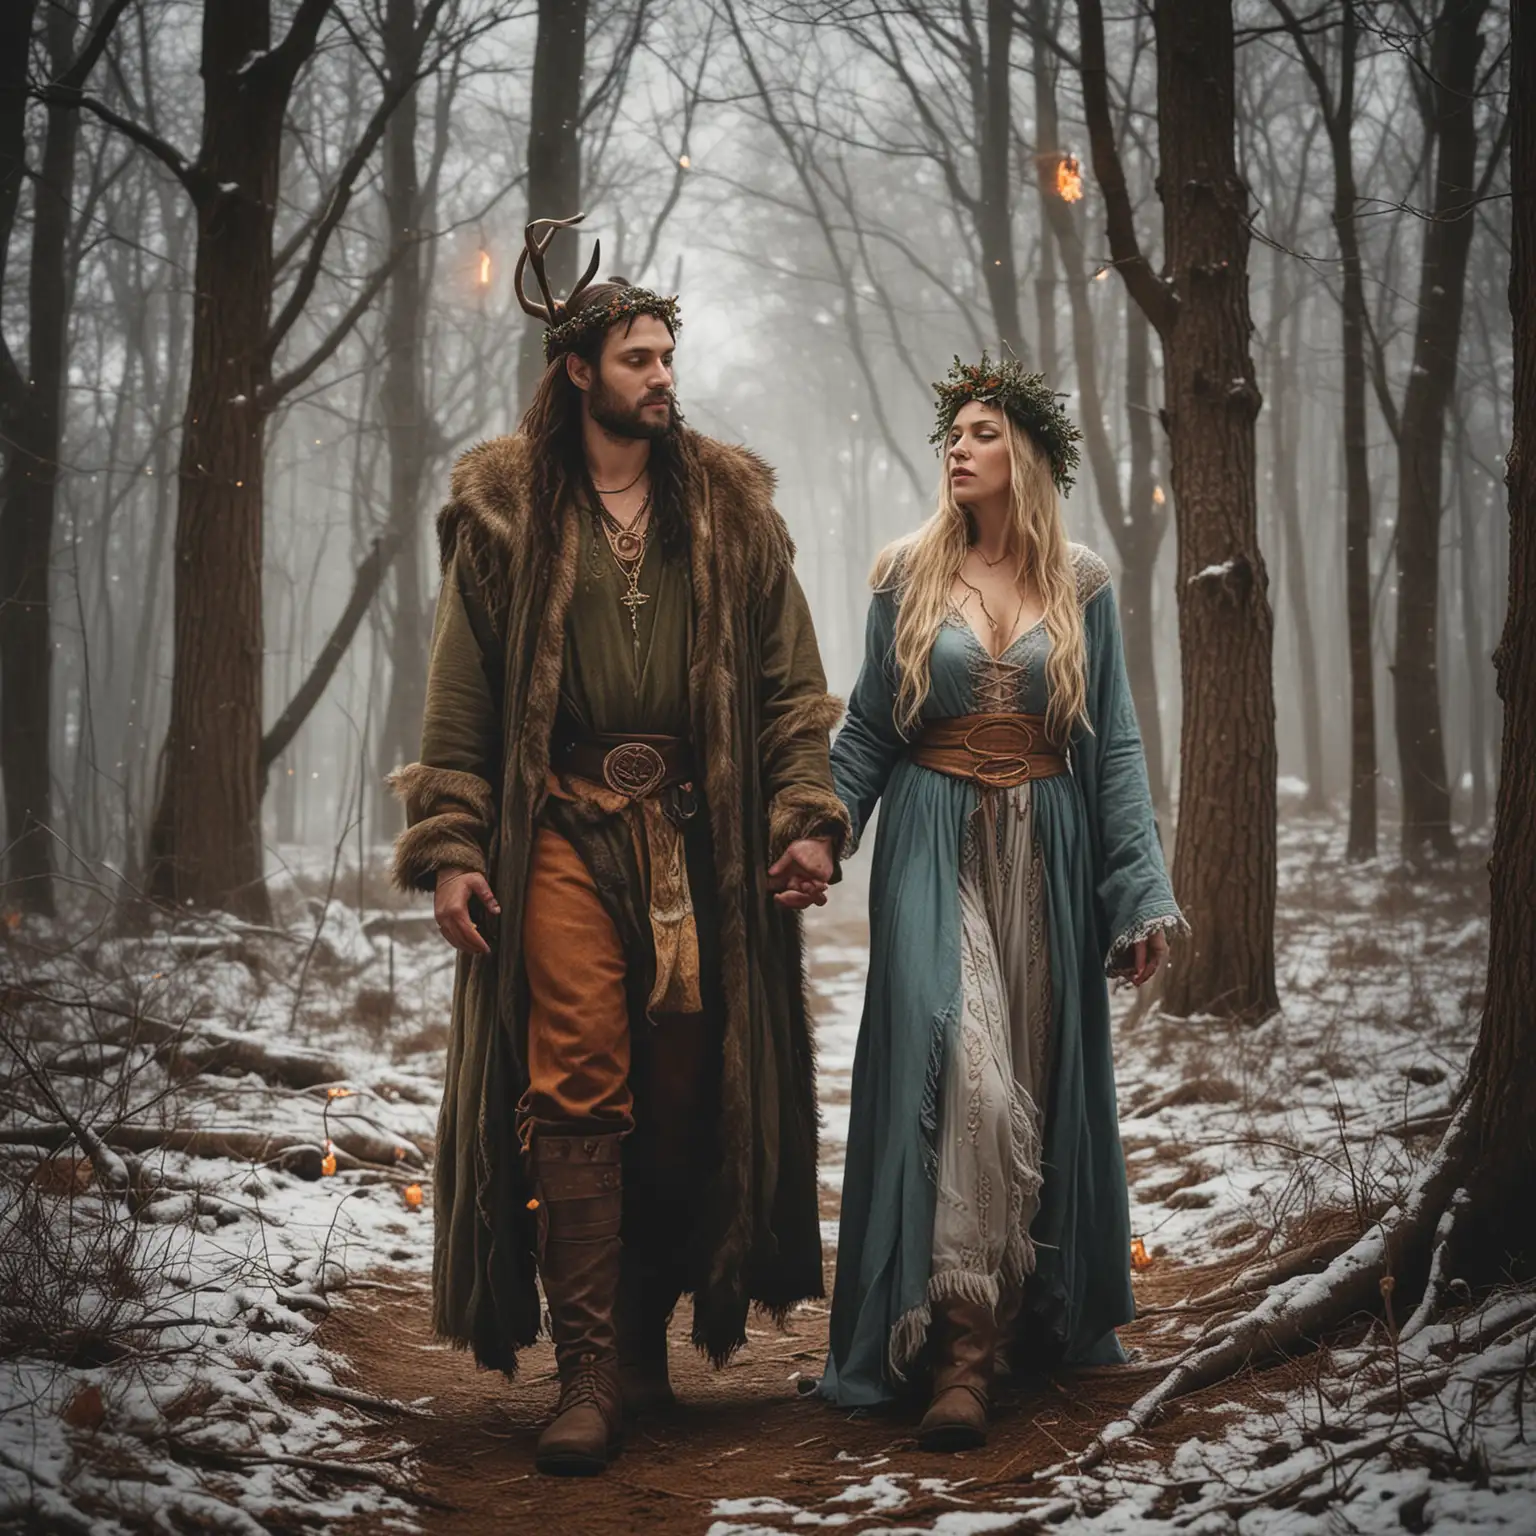 create a realistic image of a pagan winter solstice celebration in a wooded area show a pagan man and a pagan woman at the celebration

